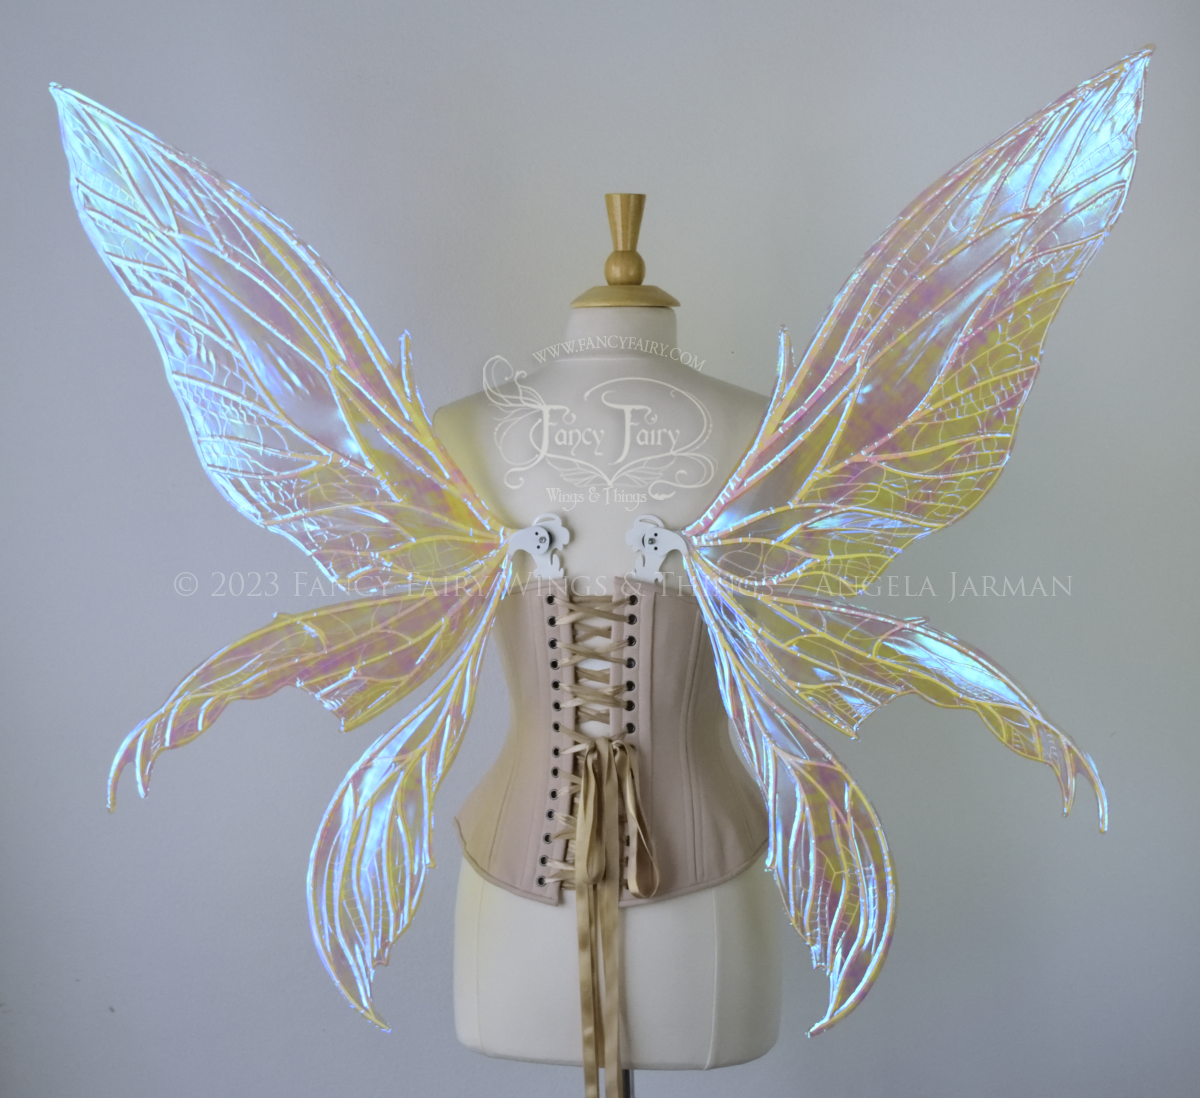 Back view of an ivory dress form wearing an underbust corset and large blue/teal/violet iridescent fairy wings. Upper panels are elongated with pointed tips, 2 lower panels curve downward, detailed white veins 